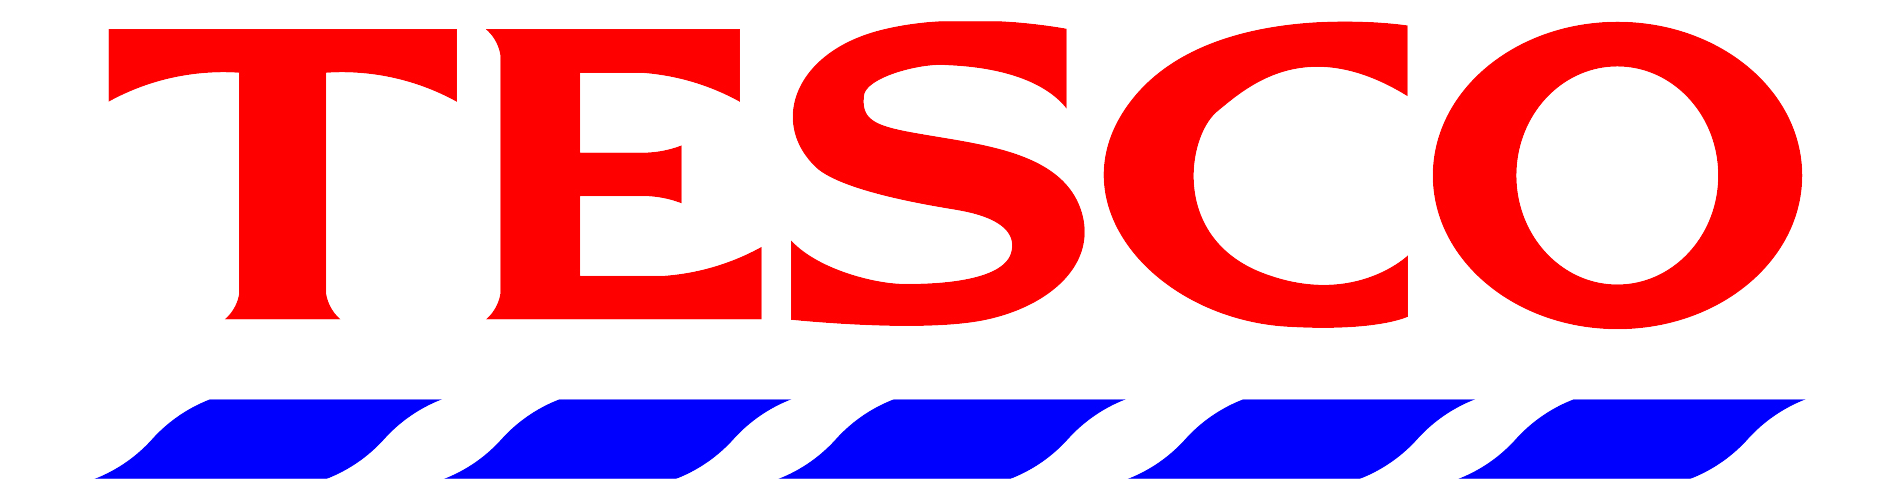 Download Logo Text Tesco Area Retail Free Transparent Image HD HQ PNG ...